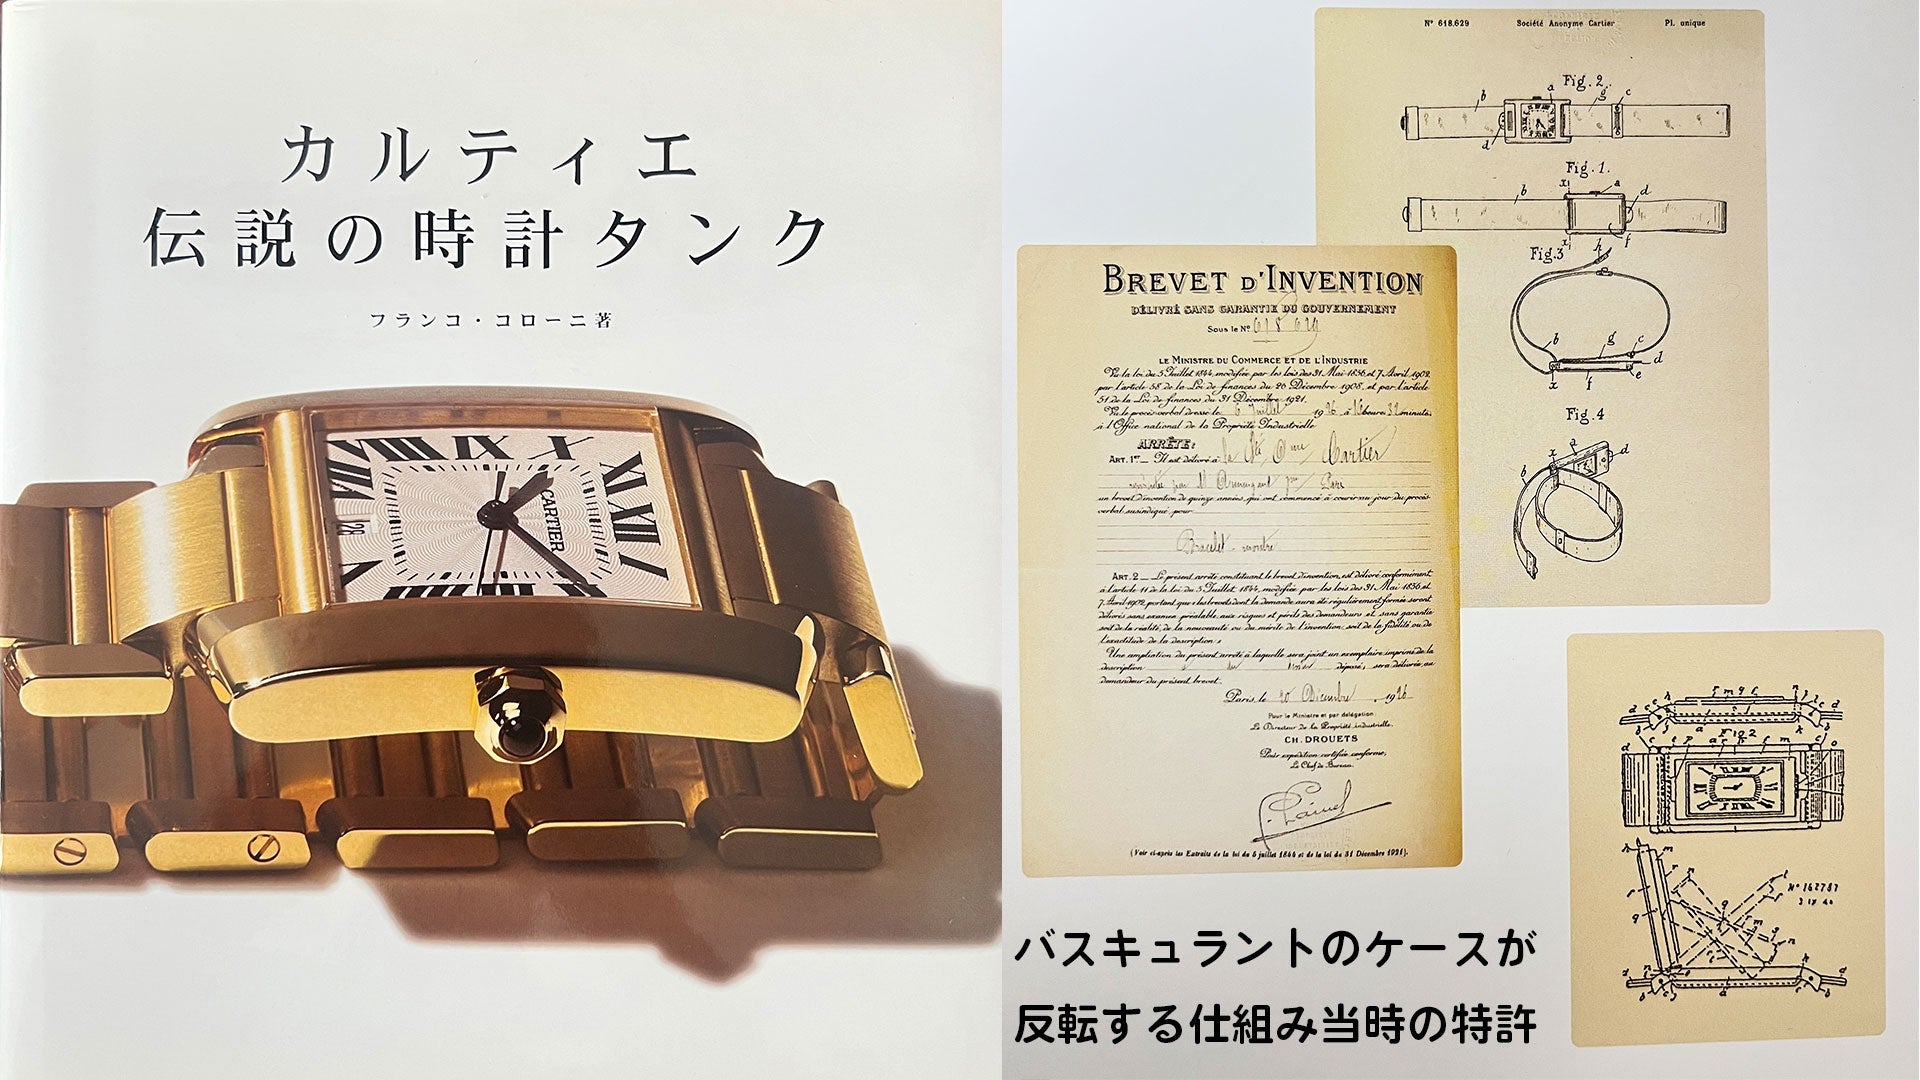 Franco Coloni's book: Cartier's legendary Tank watch: The mechanism by which the Basculant case flips over and the patent at the time